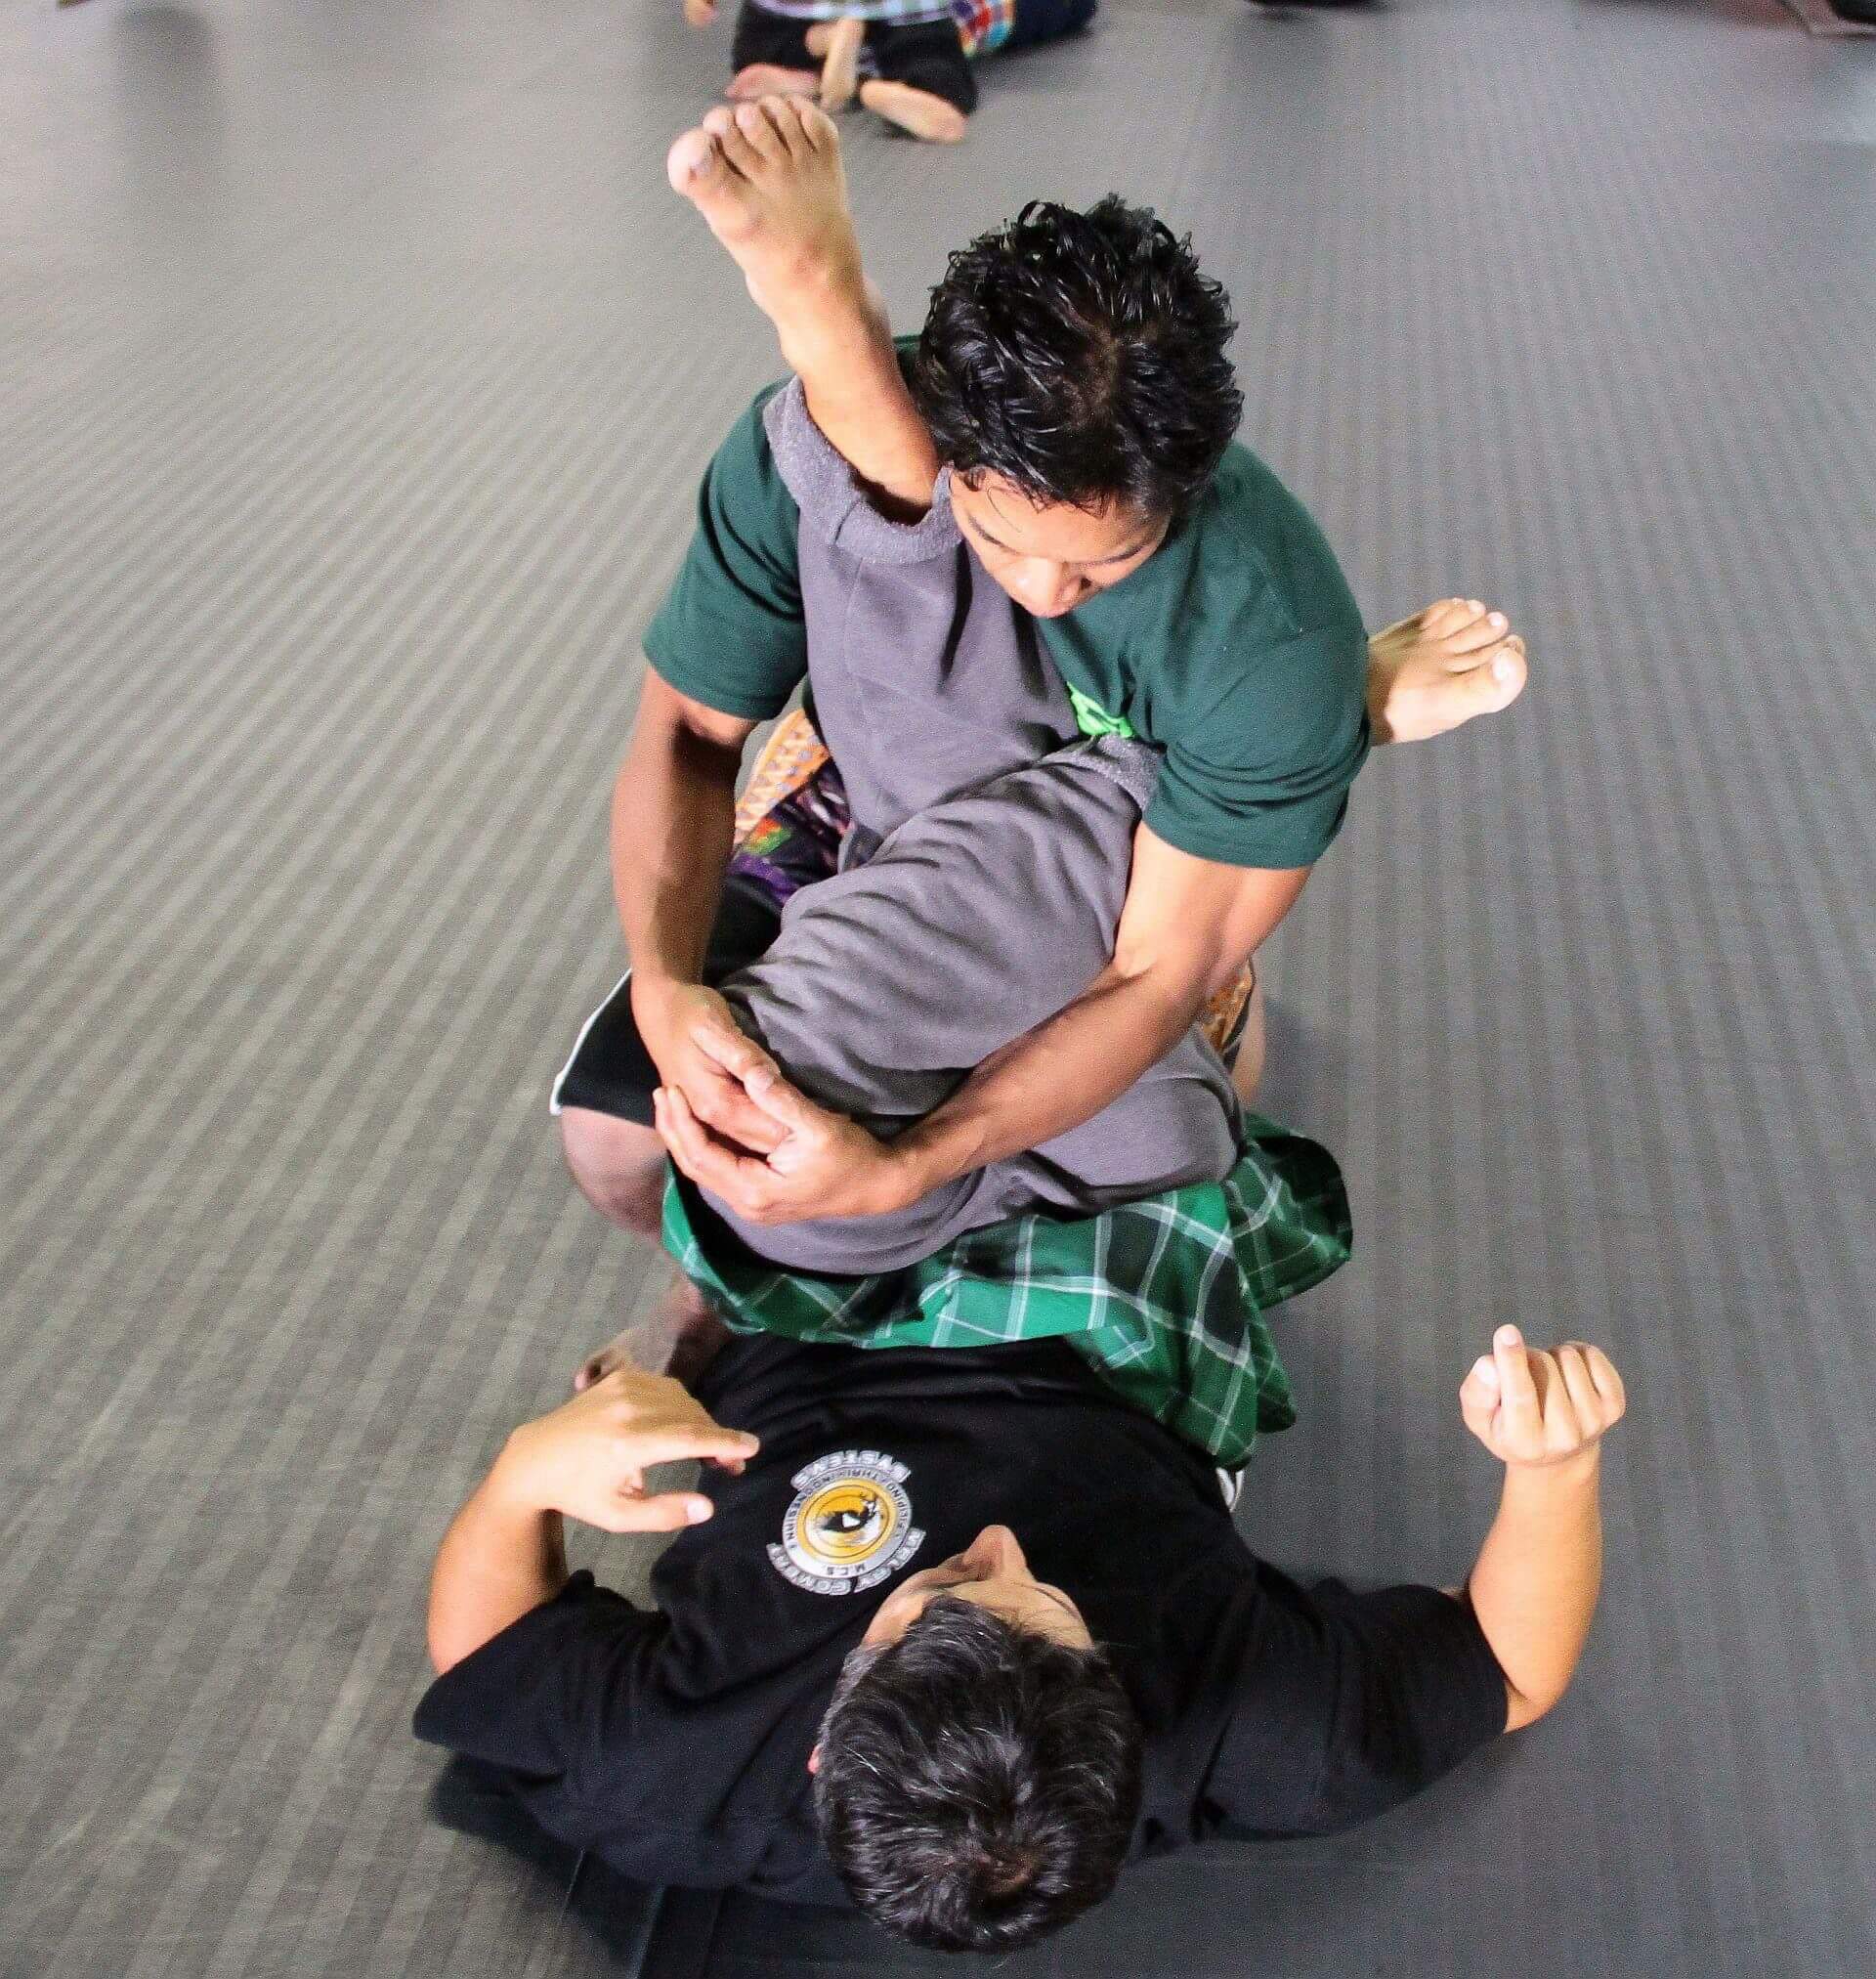 Silat Martial arts in action